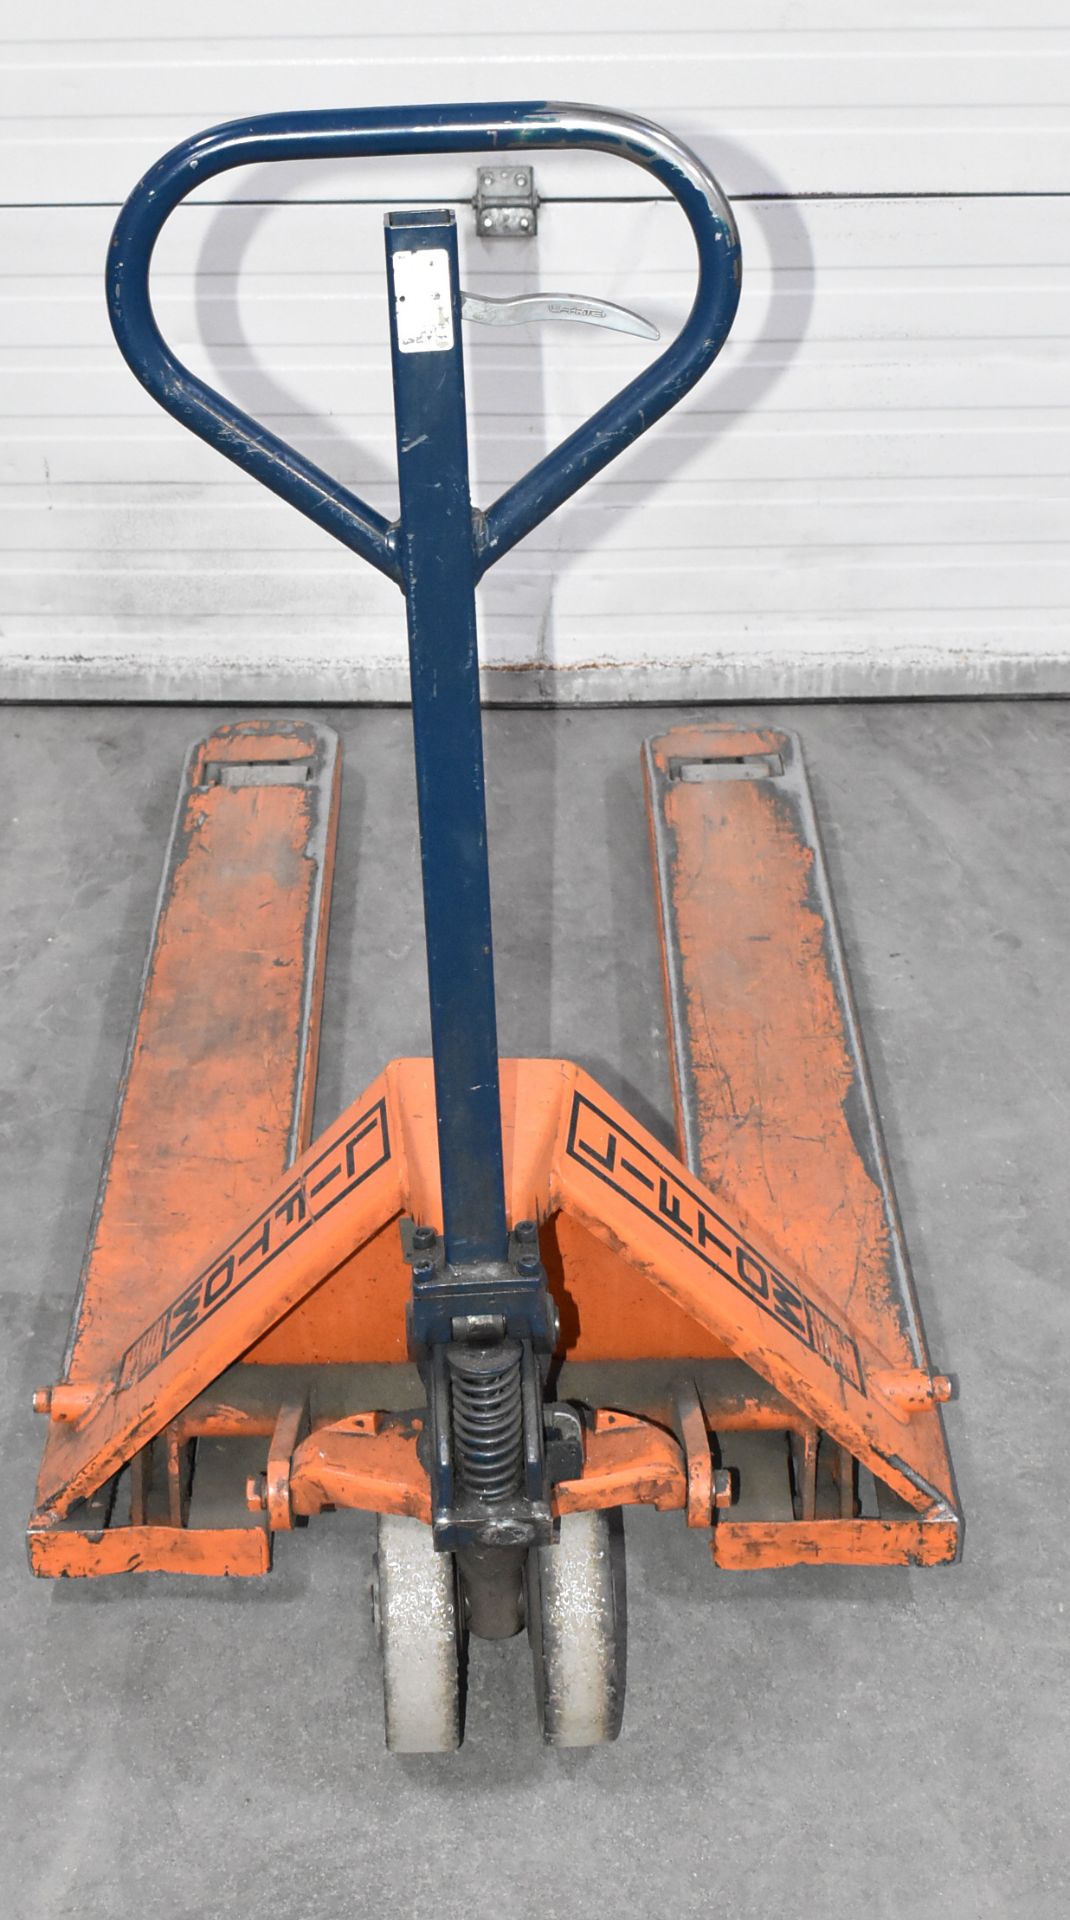 LIFT-RITE L50 HYDRAULIC PALLET JACK WITH 5,500 LB CAPACITY, S/N G 06582-00 - Image 3 of 4